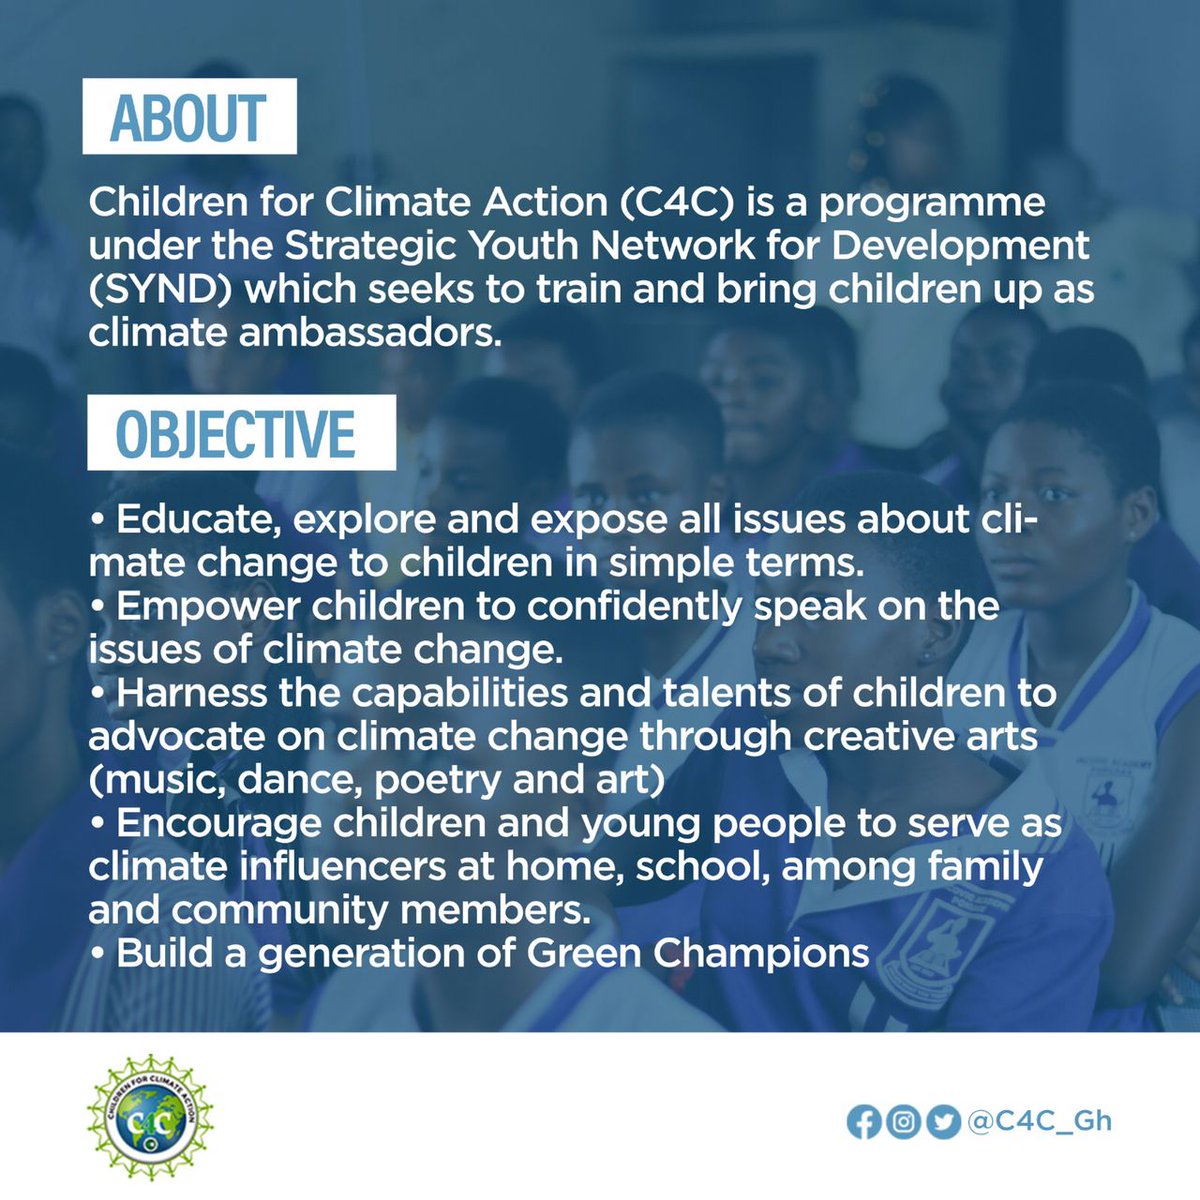 Exciting news! This week, we'll be sharing impact stories from our Children for Climate Action Campaign, based on our 2022 engagements with children.  #ChildrenForClimateAction #ClimateActivism #ImpactStories #YouthClimateLeaders